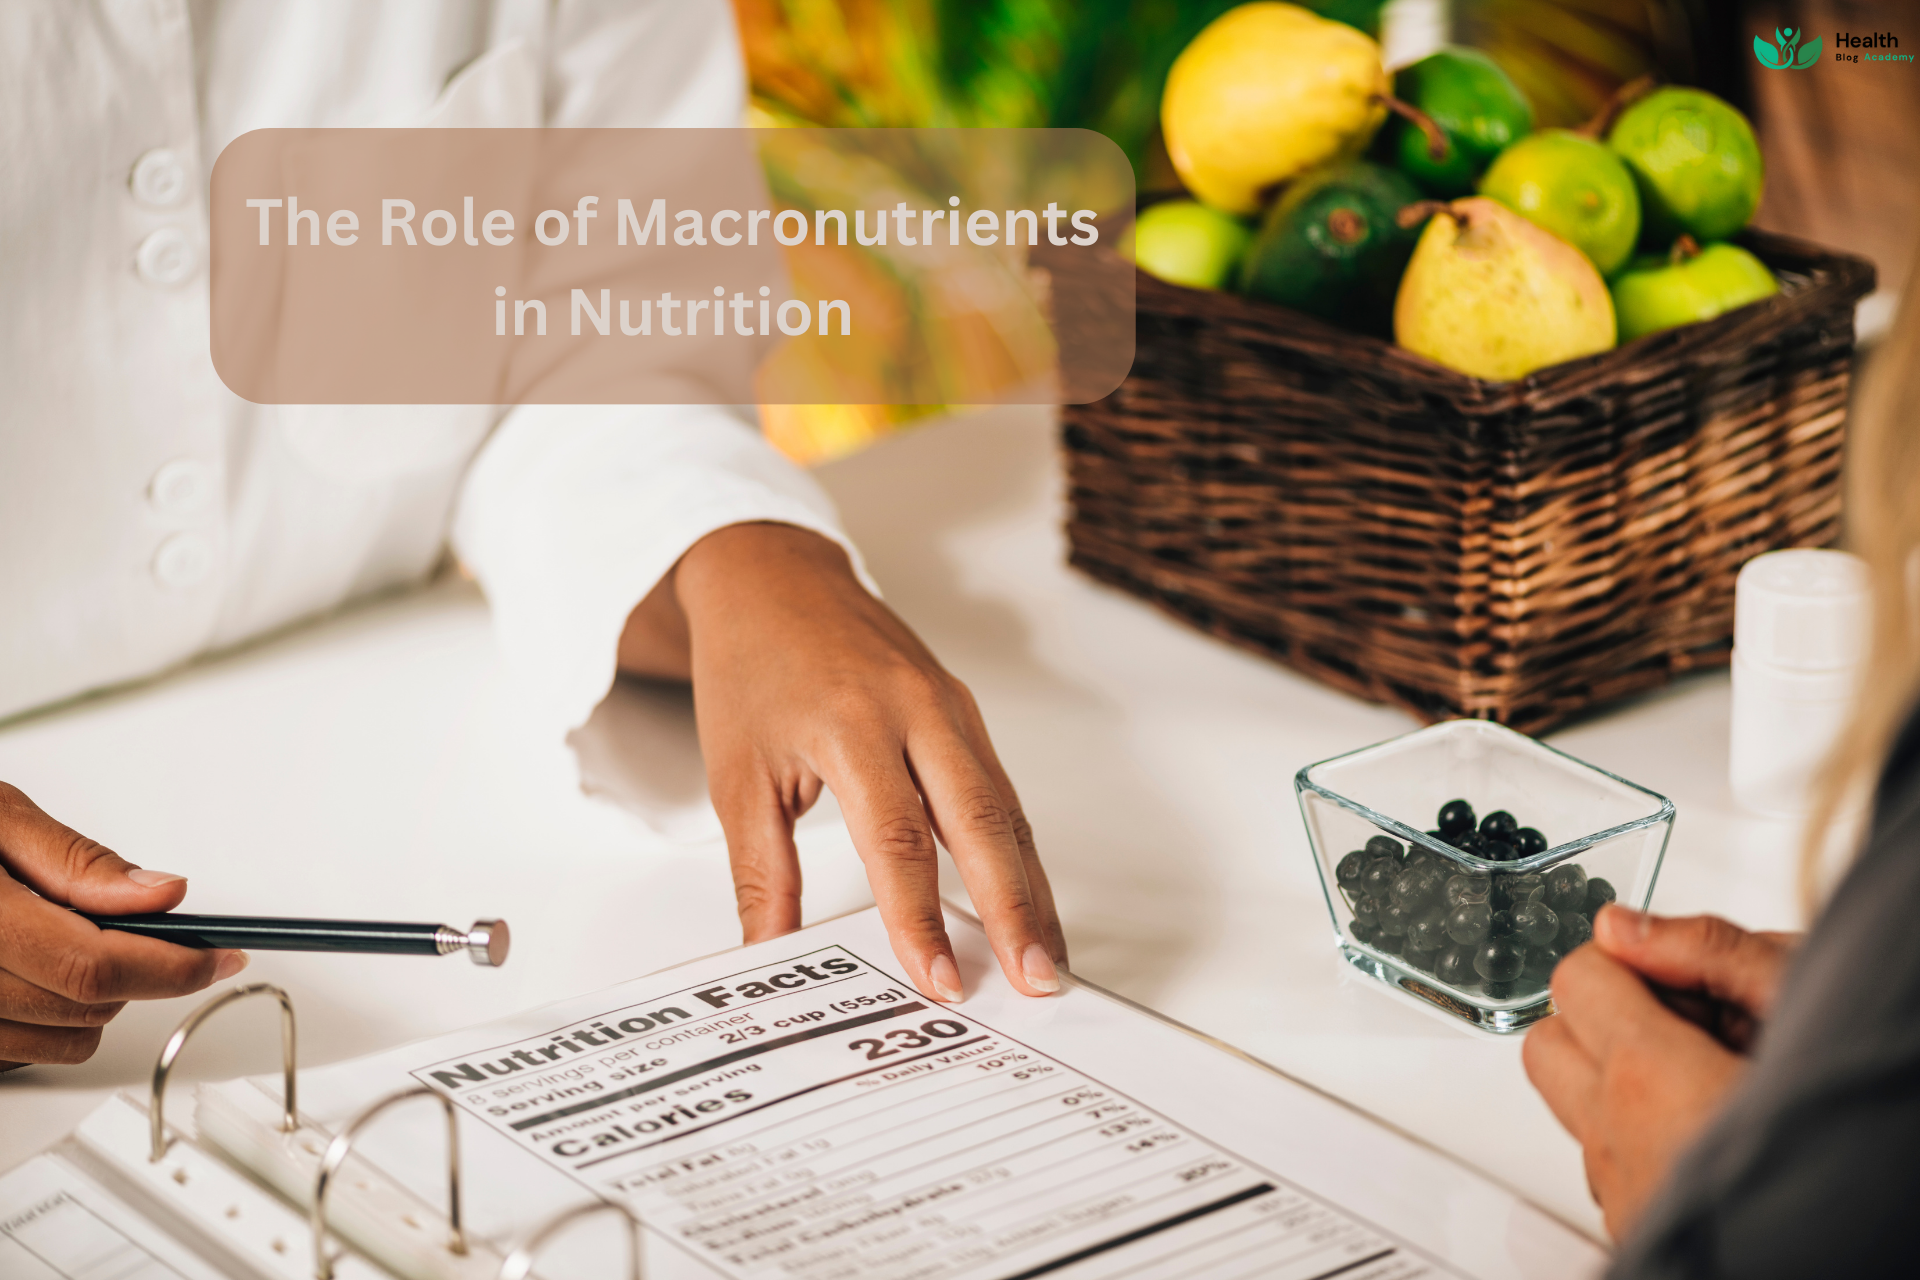 The Role of Macronutrients in Nutrition